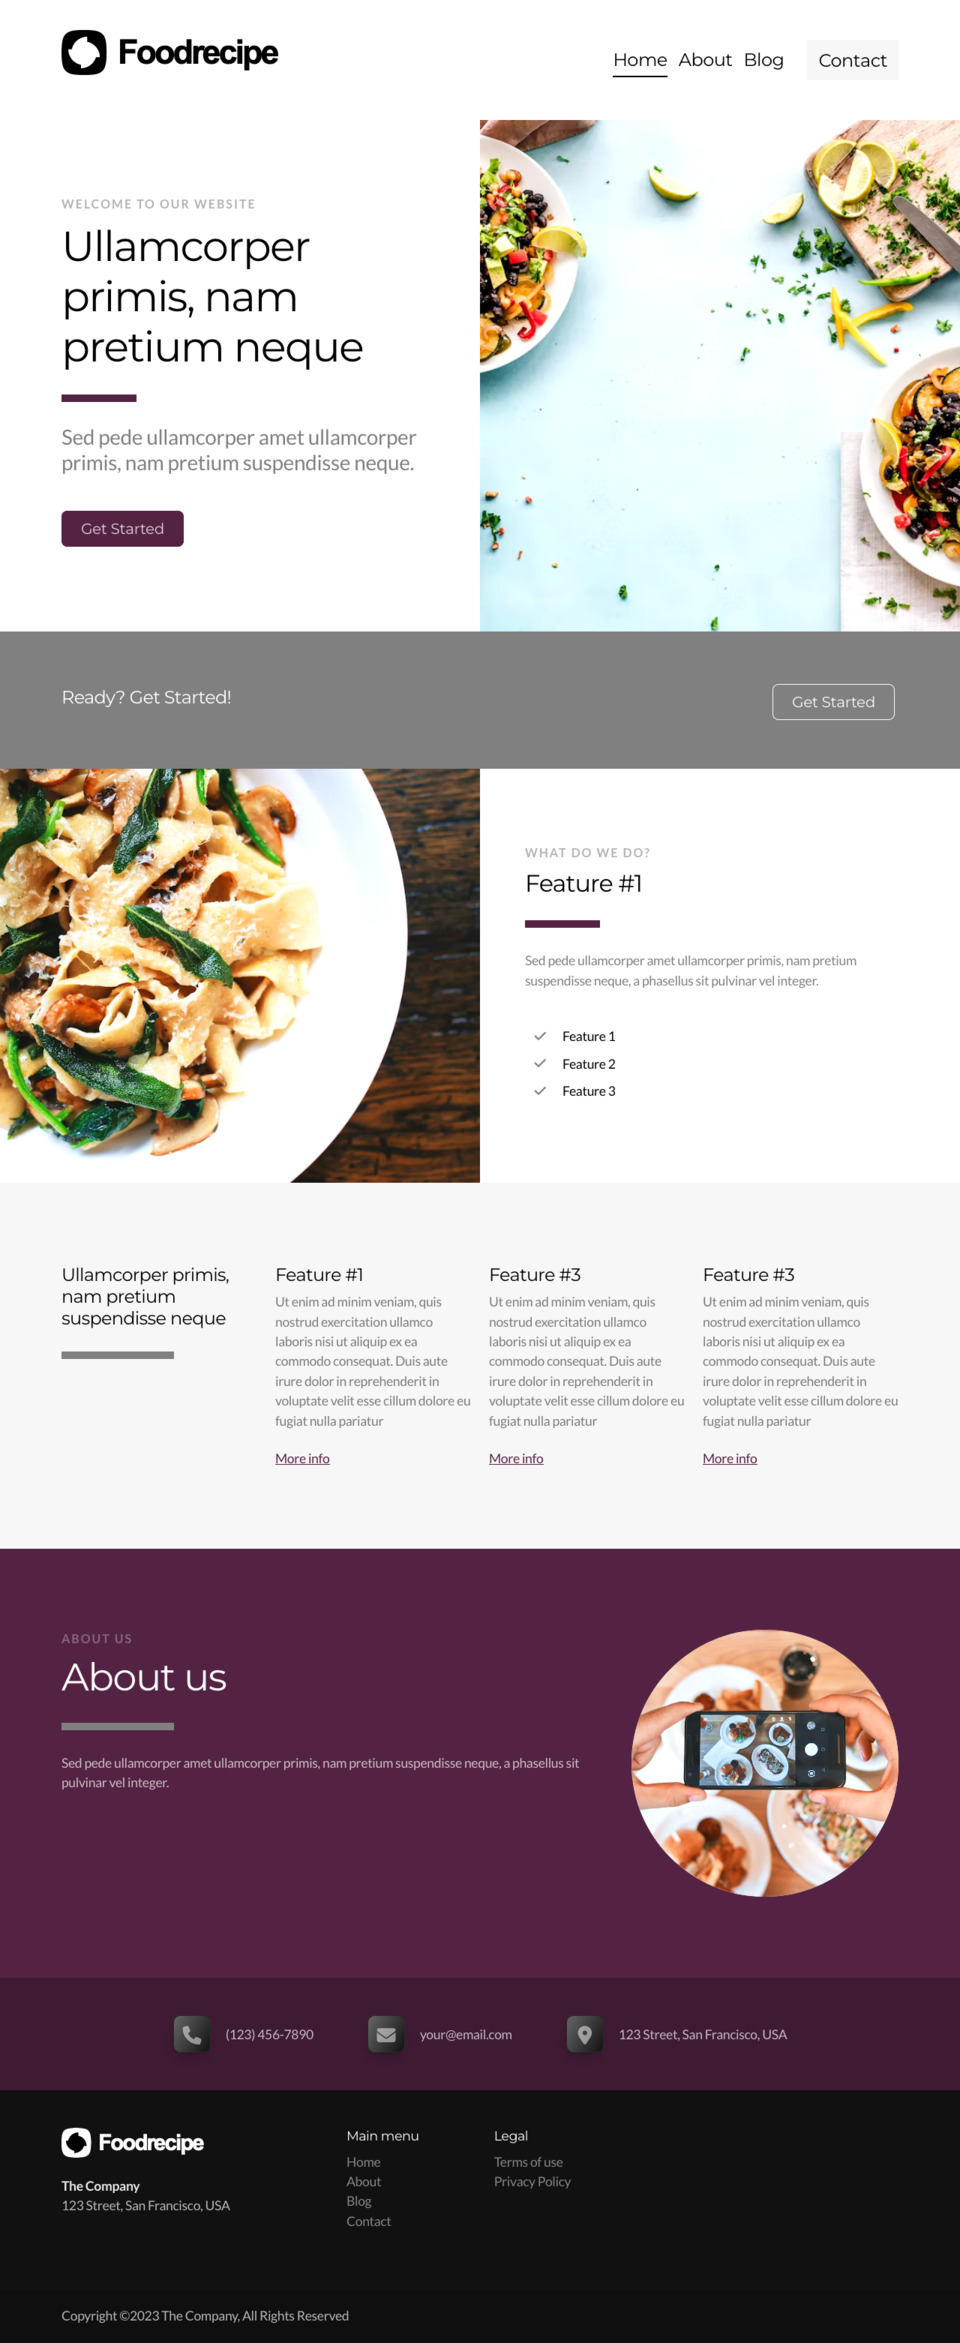 Food Recipe Website Template - Food bloggers, restaurants, meal planners, cooking enthusiasts